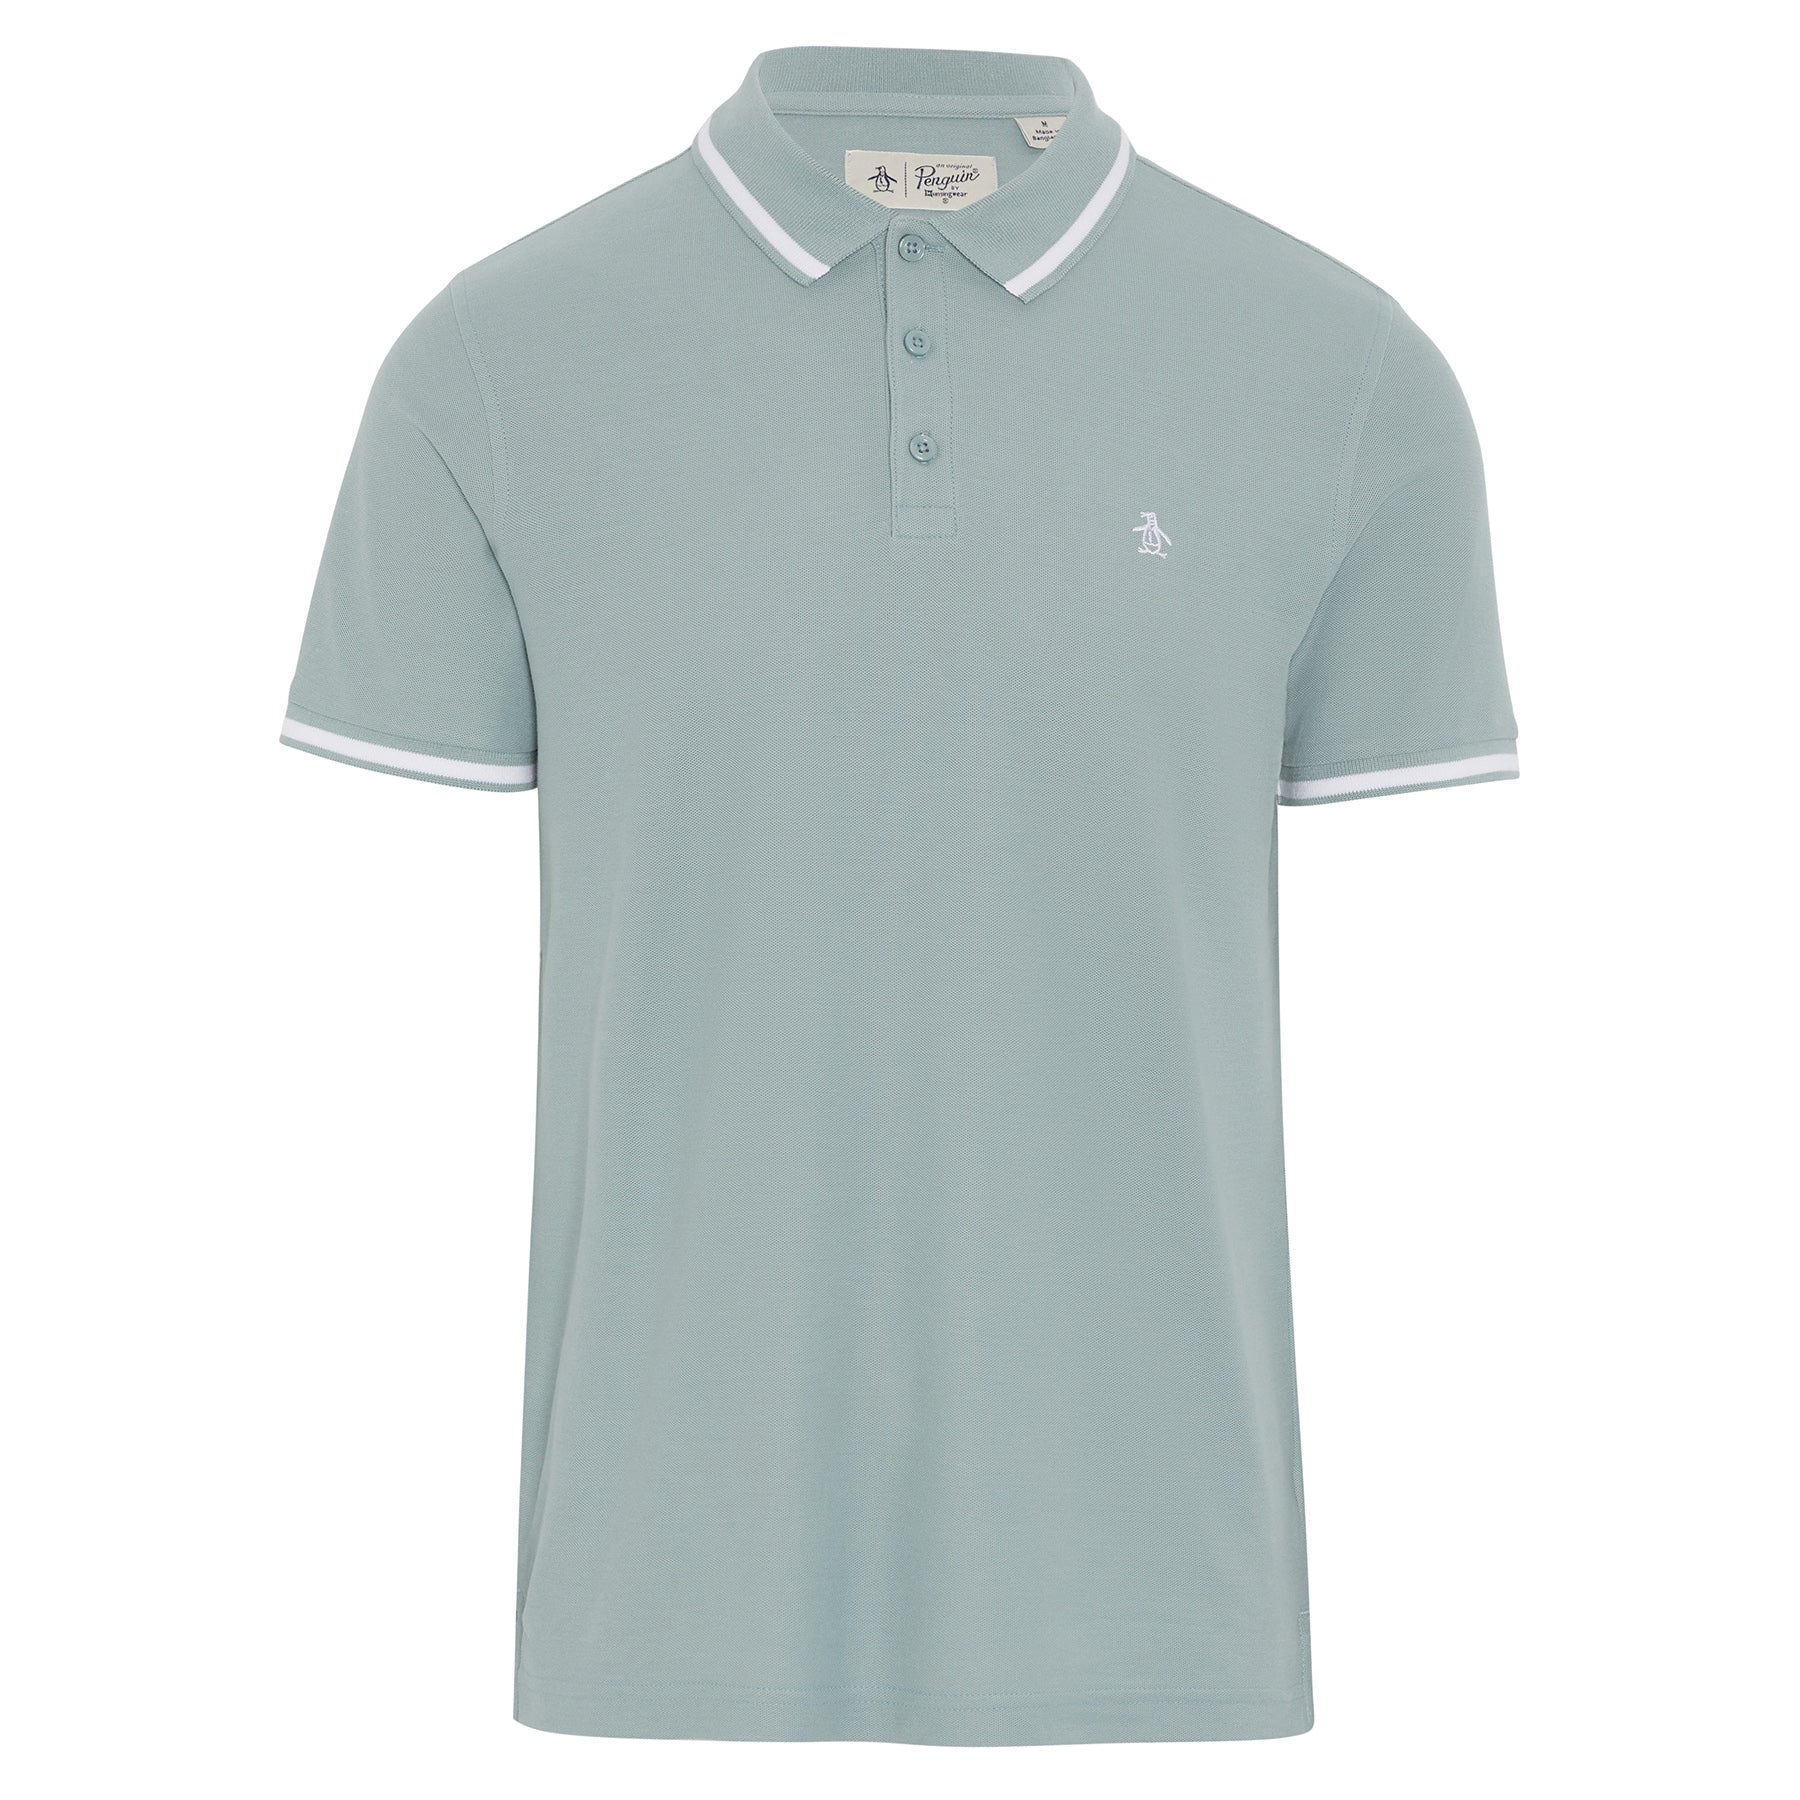 View Short Sleeve Polo Shirt With Contrast Tipping In Arona information